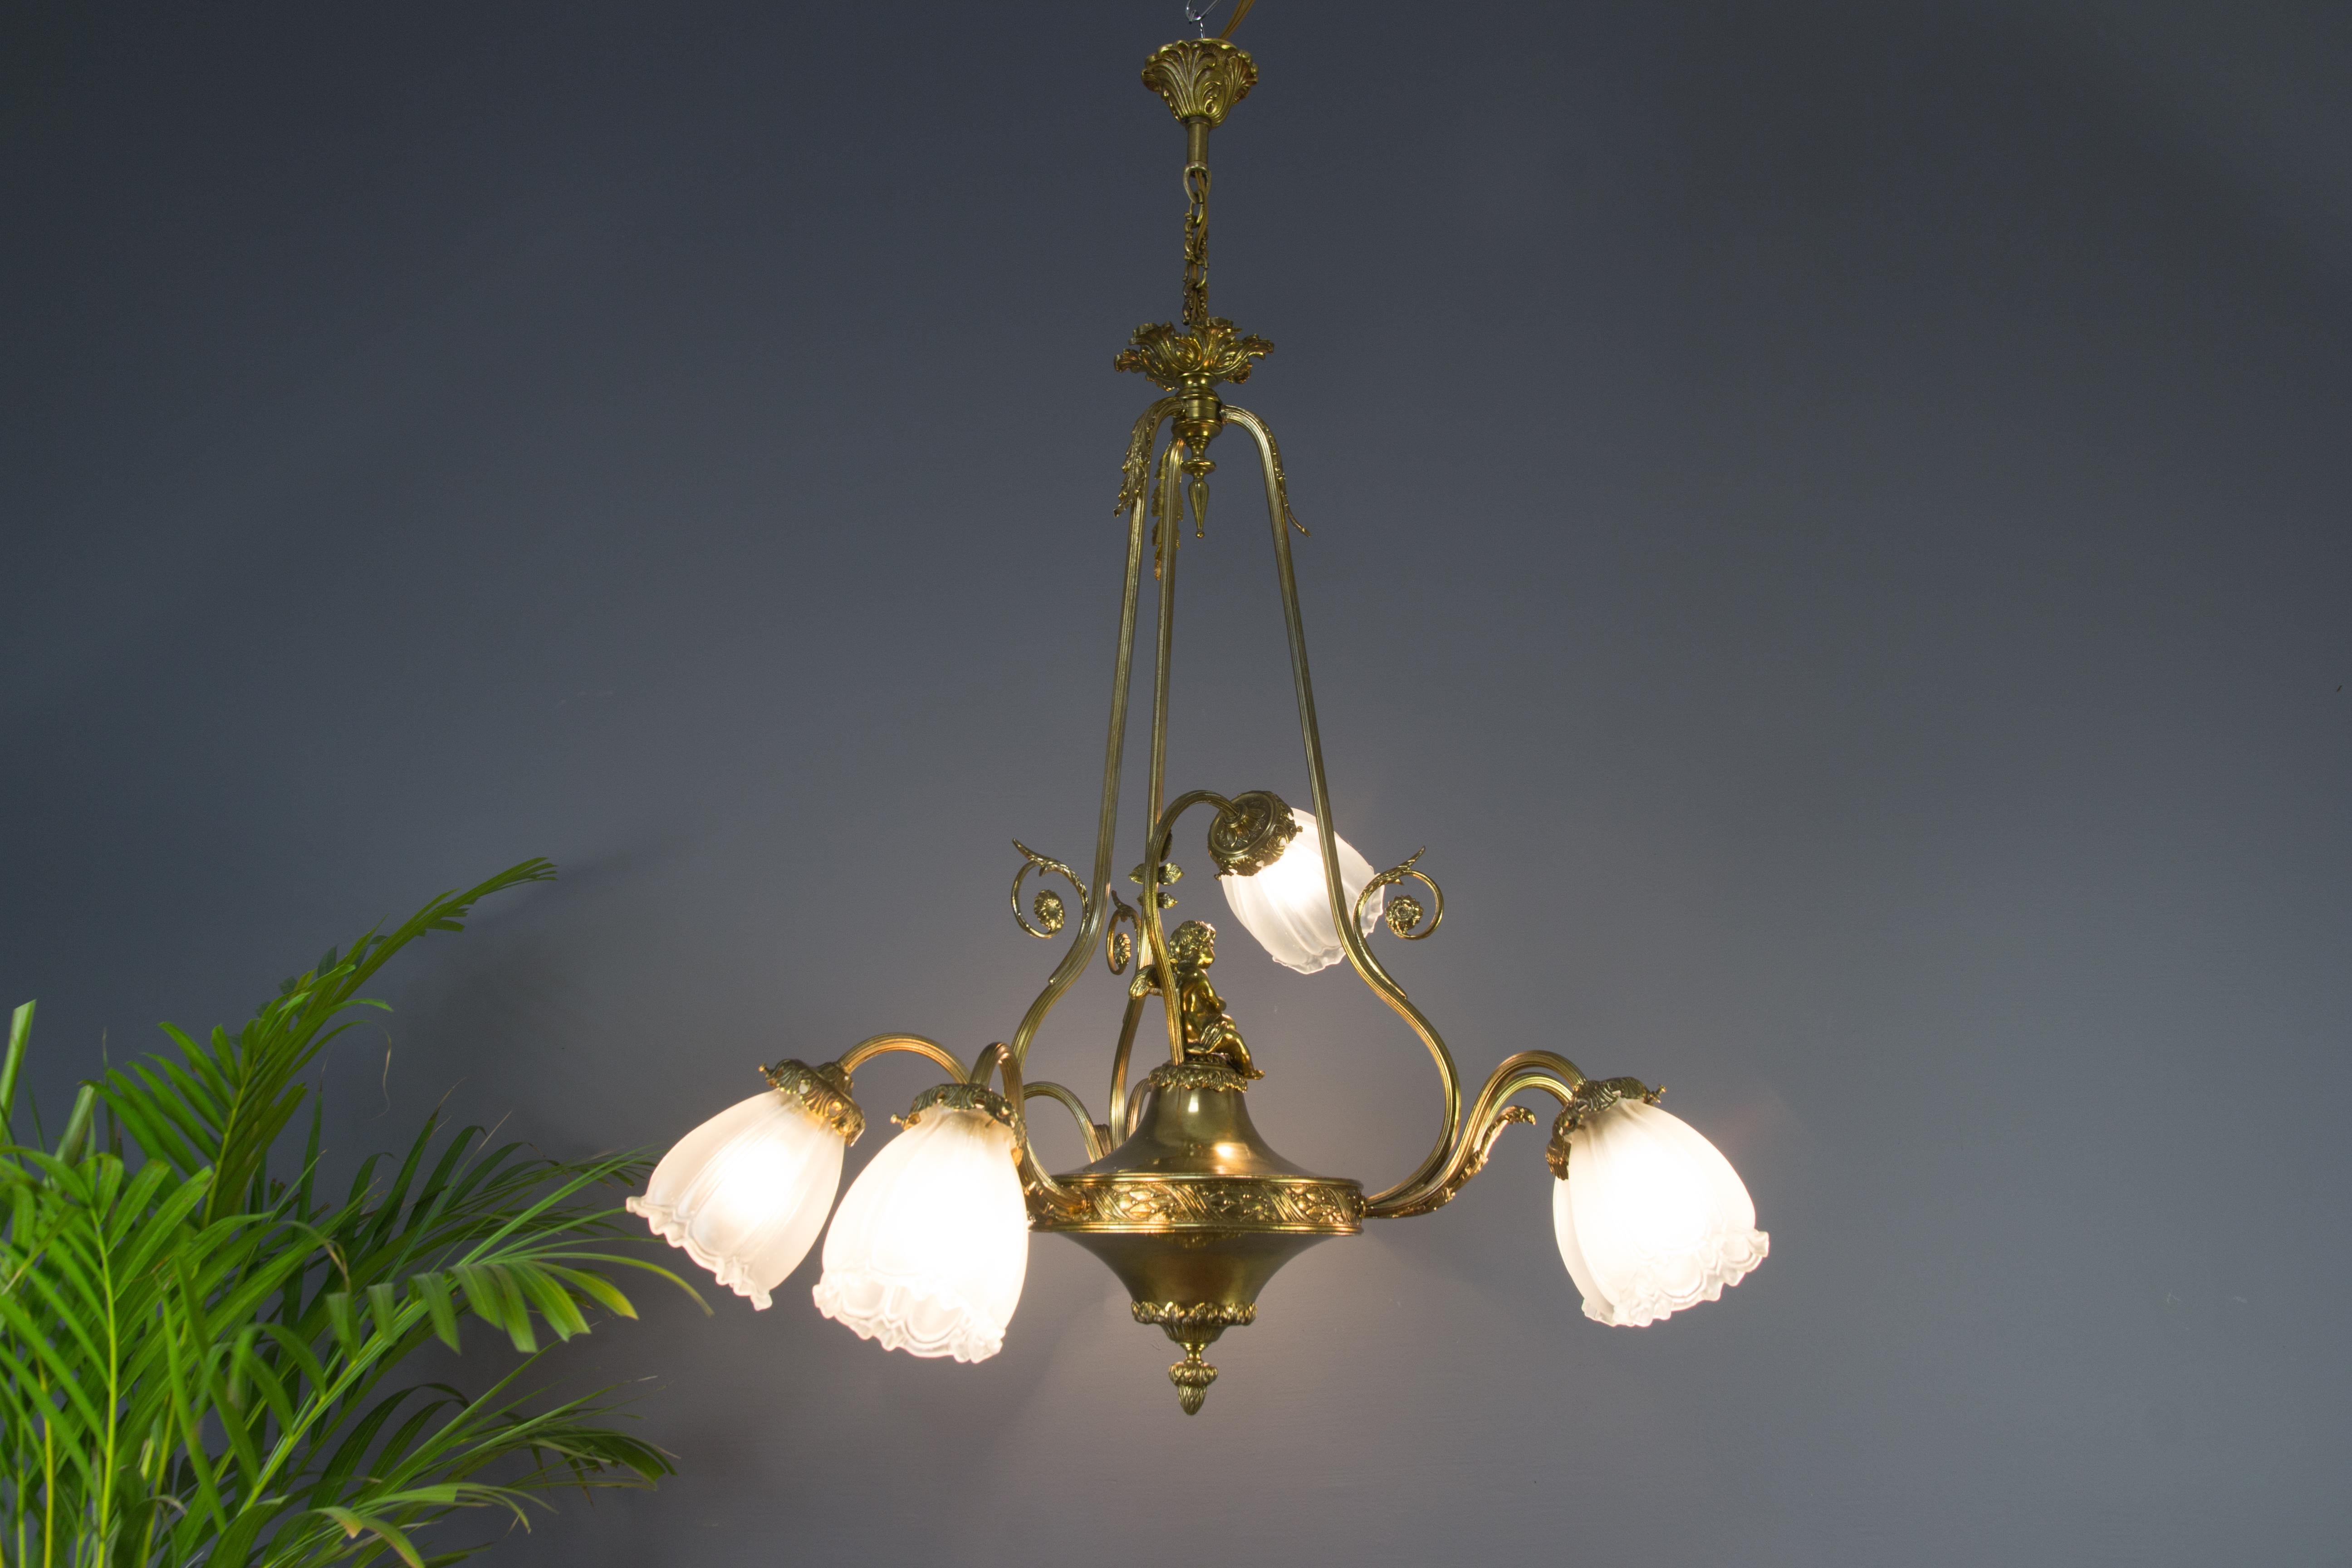 French Louis XVI style seven-light chandelier made of brass and bronze in the 1920s. Bronze details of acanthus leaves and a sitting cherub figurine. Seven beautifully shaped frosted glass shades with sockets for E 27 size light bulbs.
Dimensions: